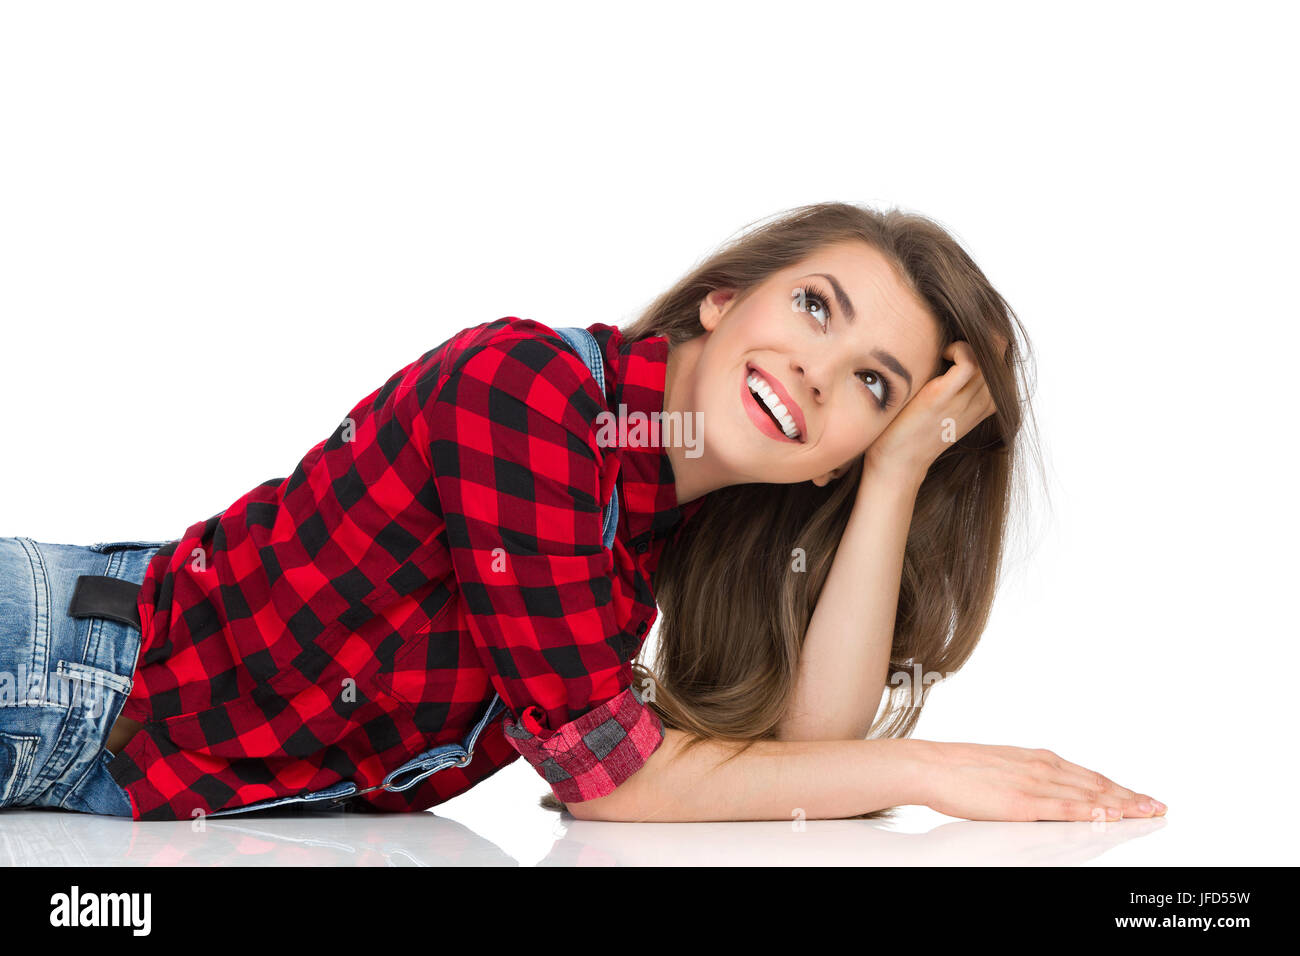 Smiling young woman in red lumberjack shirt lying on a floor and looking away. Waist up studio shot isolated on white. Stock Photo